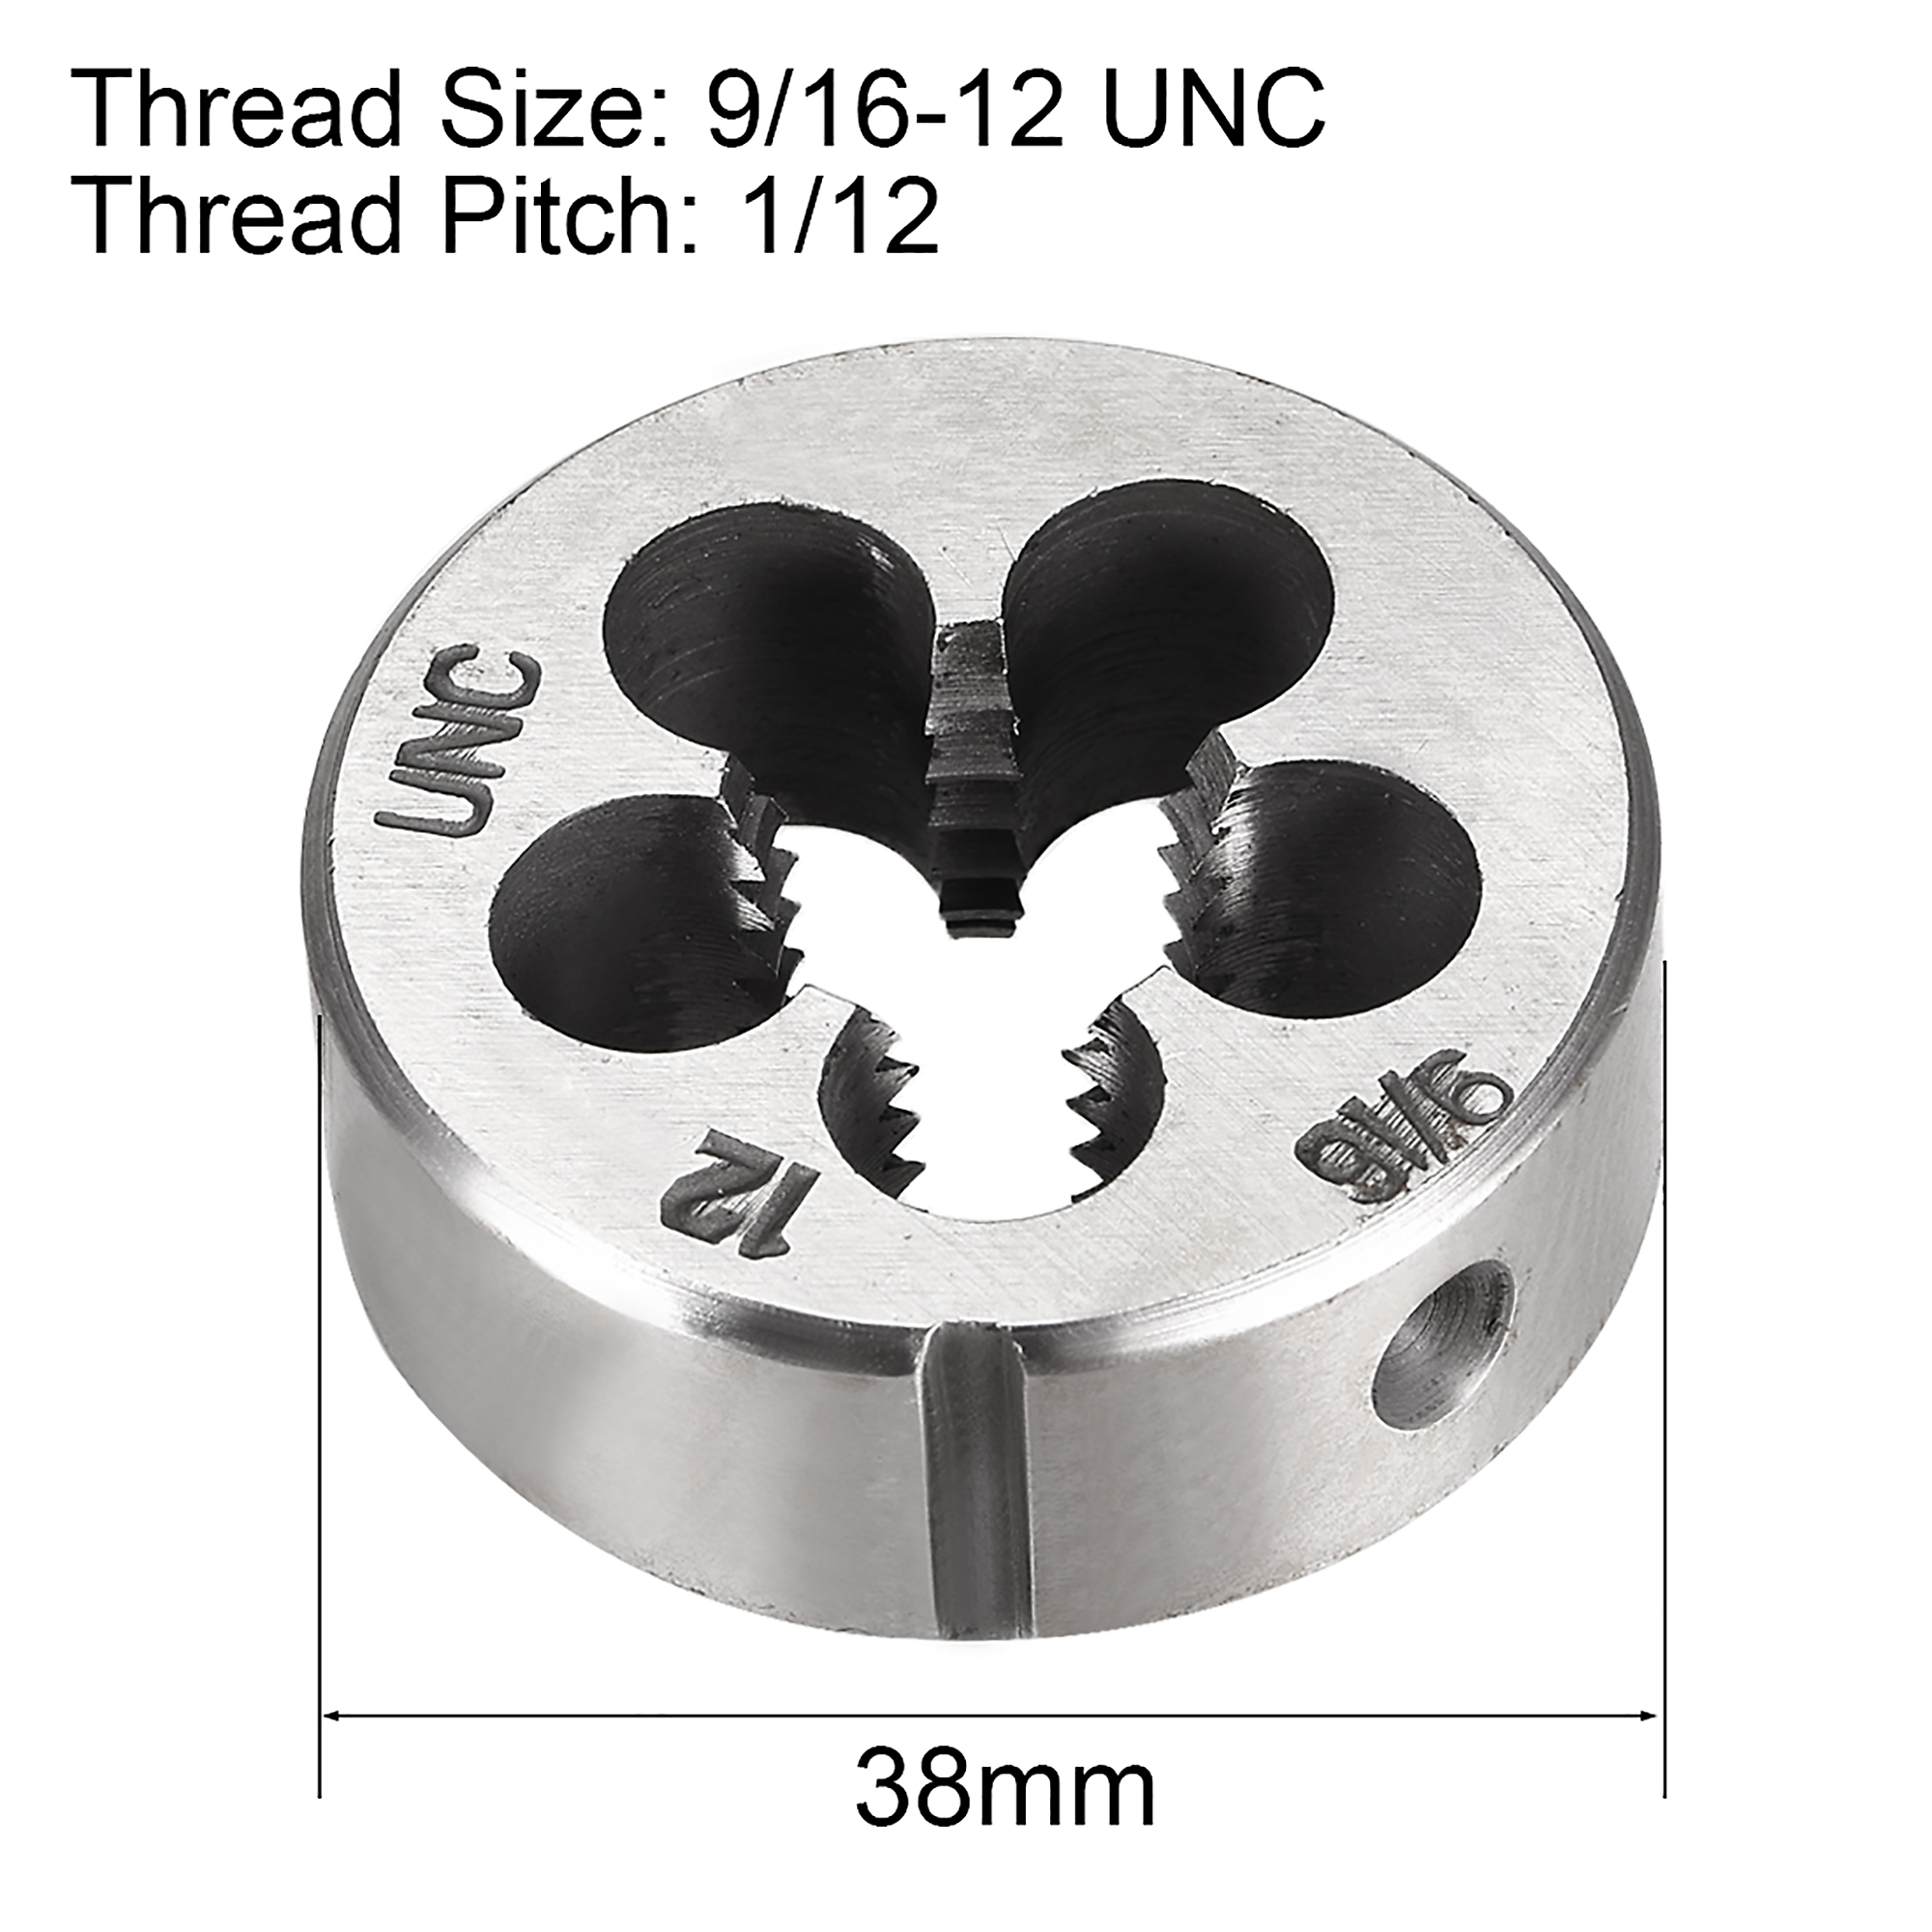 Uxcell 9/16-12 UNC Alloy Tool Steel Machine Thread Round Threading Dies 2 Pack - image 2 of 3